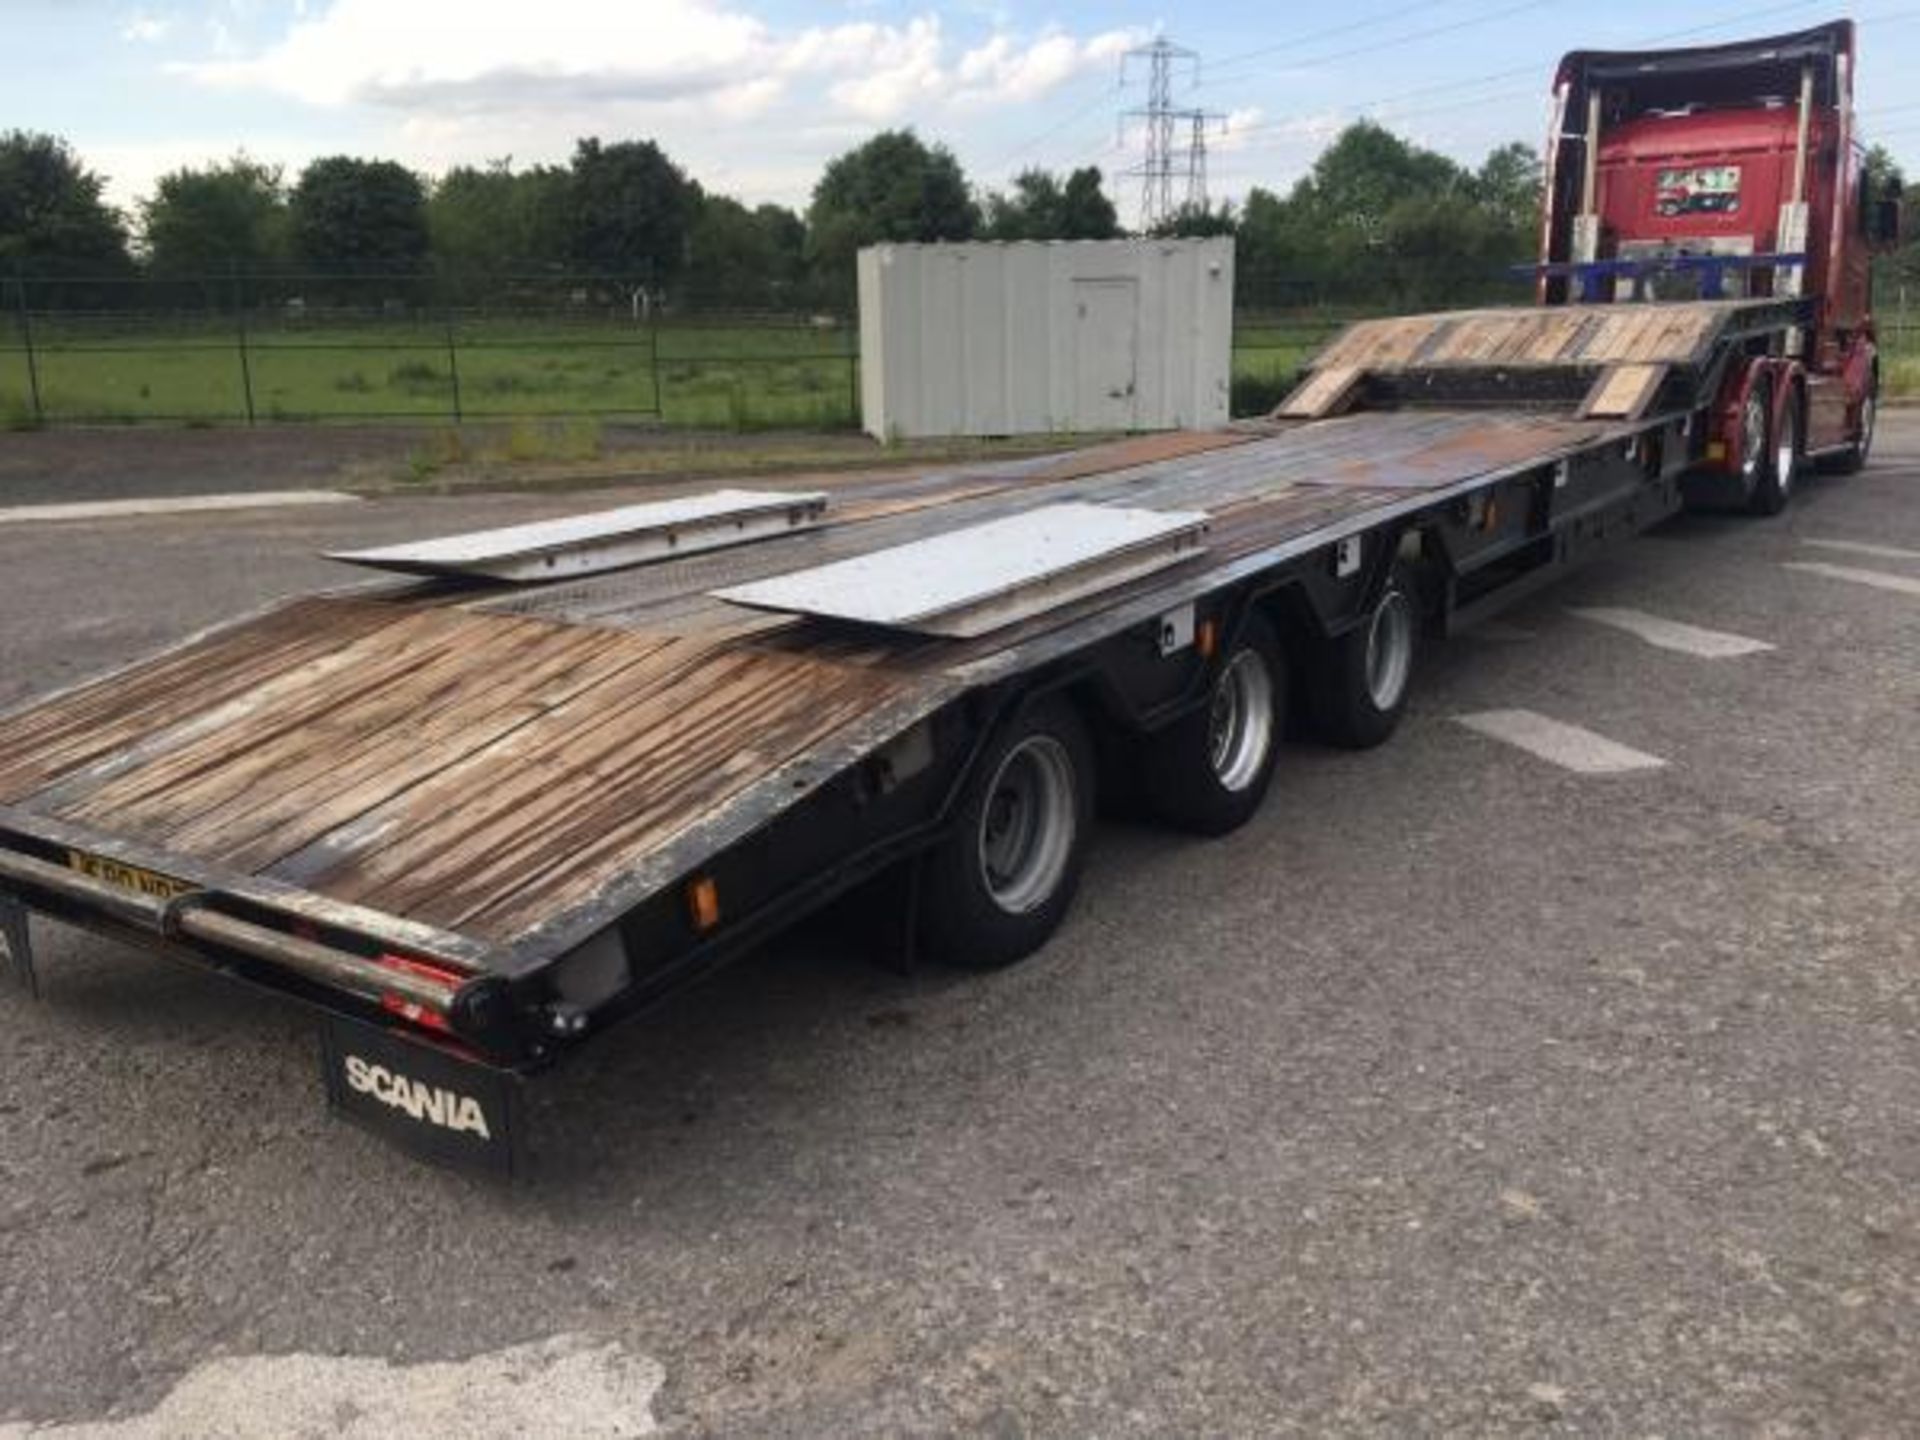 2004 CHIEFTAIN TRI AXLE LOW LOADER TRAILER, GOOD CONDITION, ALLOY RAMPS, AIR SUSPENSION *PLUS VAT* - Image 8 of 12